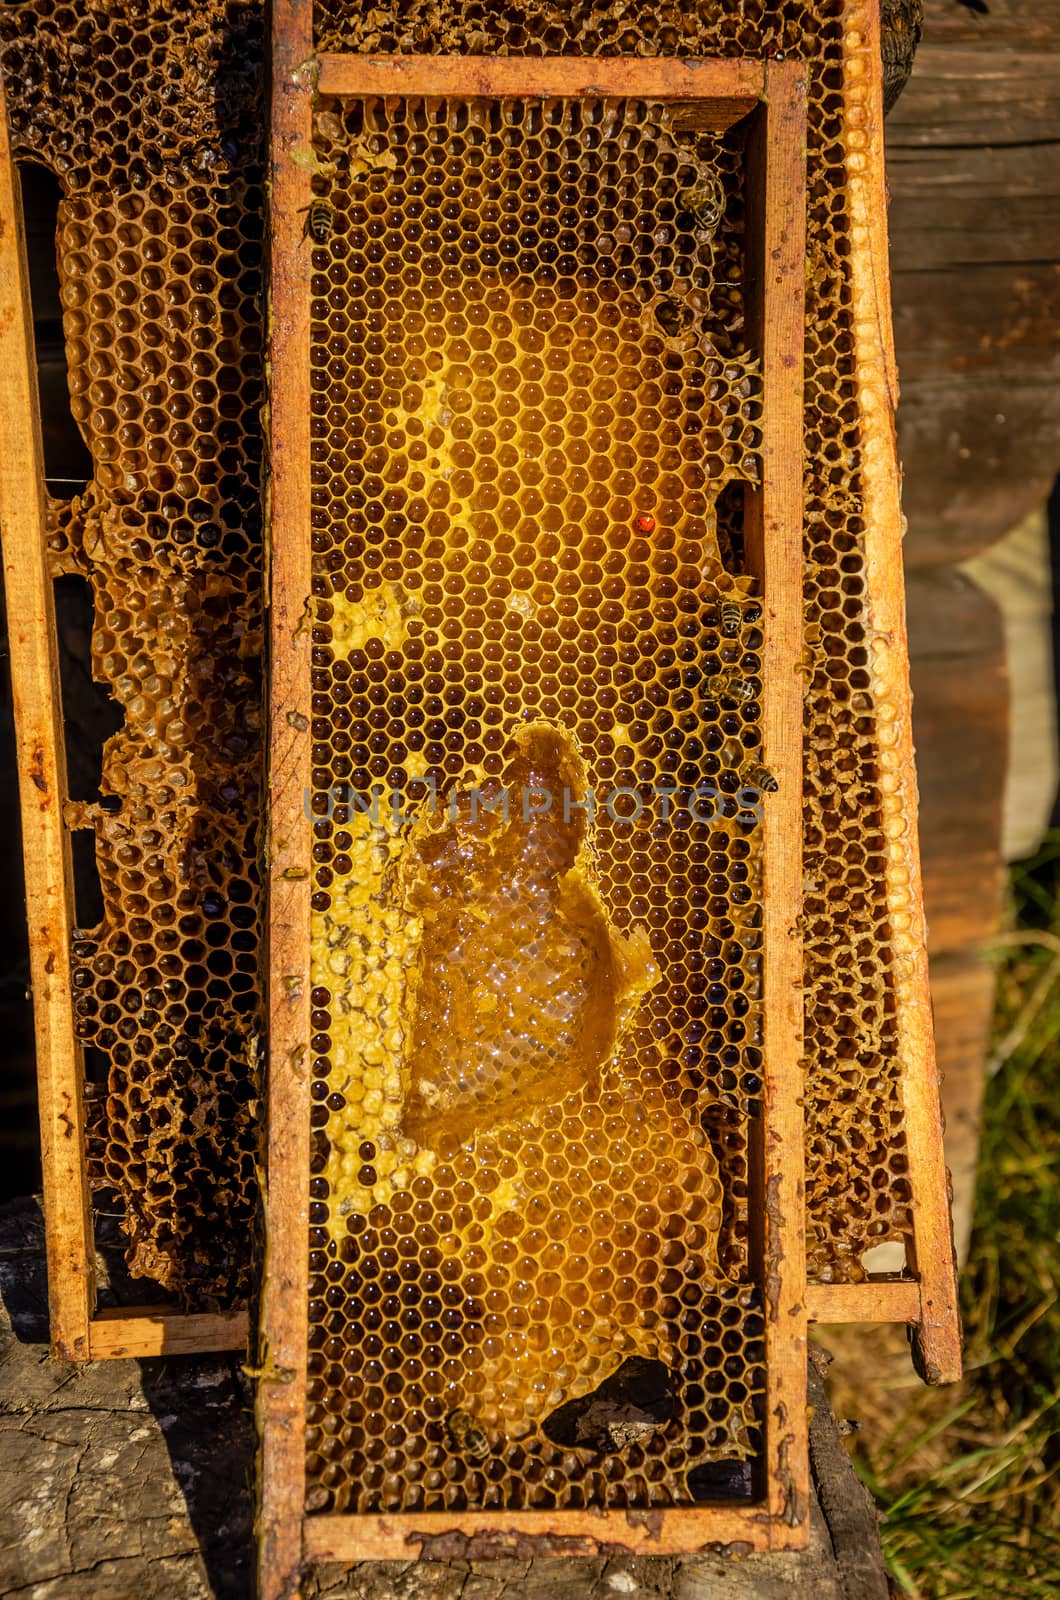 Honeycomb frames filled with honey